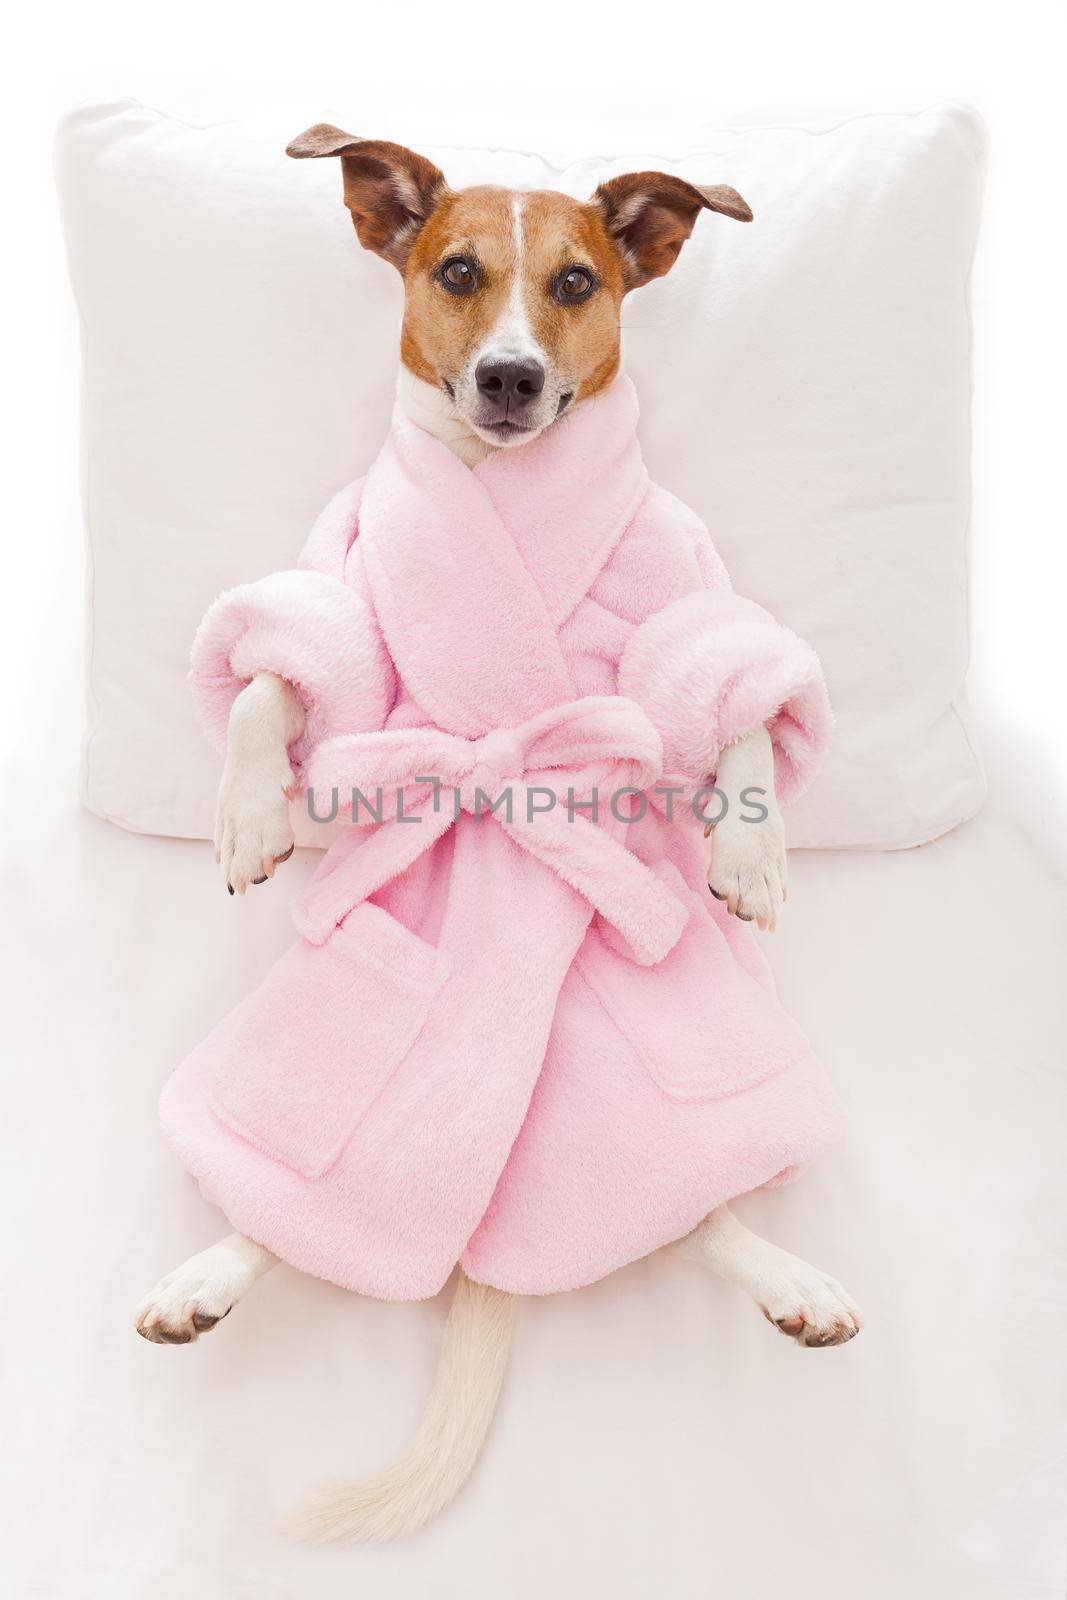 jack russell dog relaxing  and lying, in   spa wellness center ,wearing a pink  bathrobe